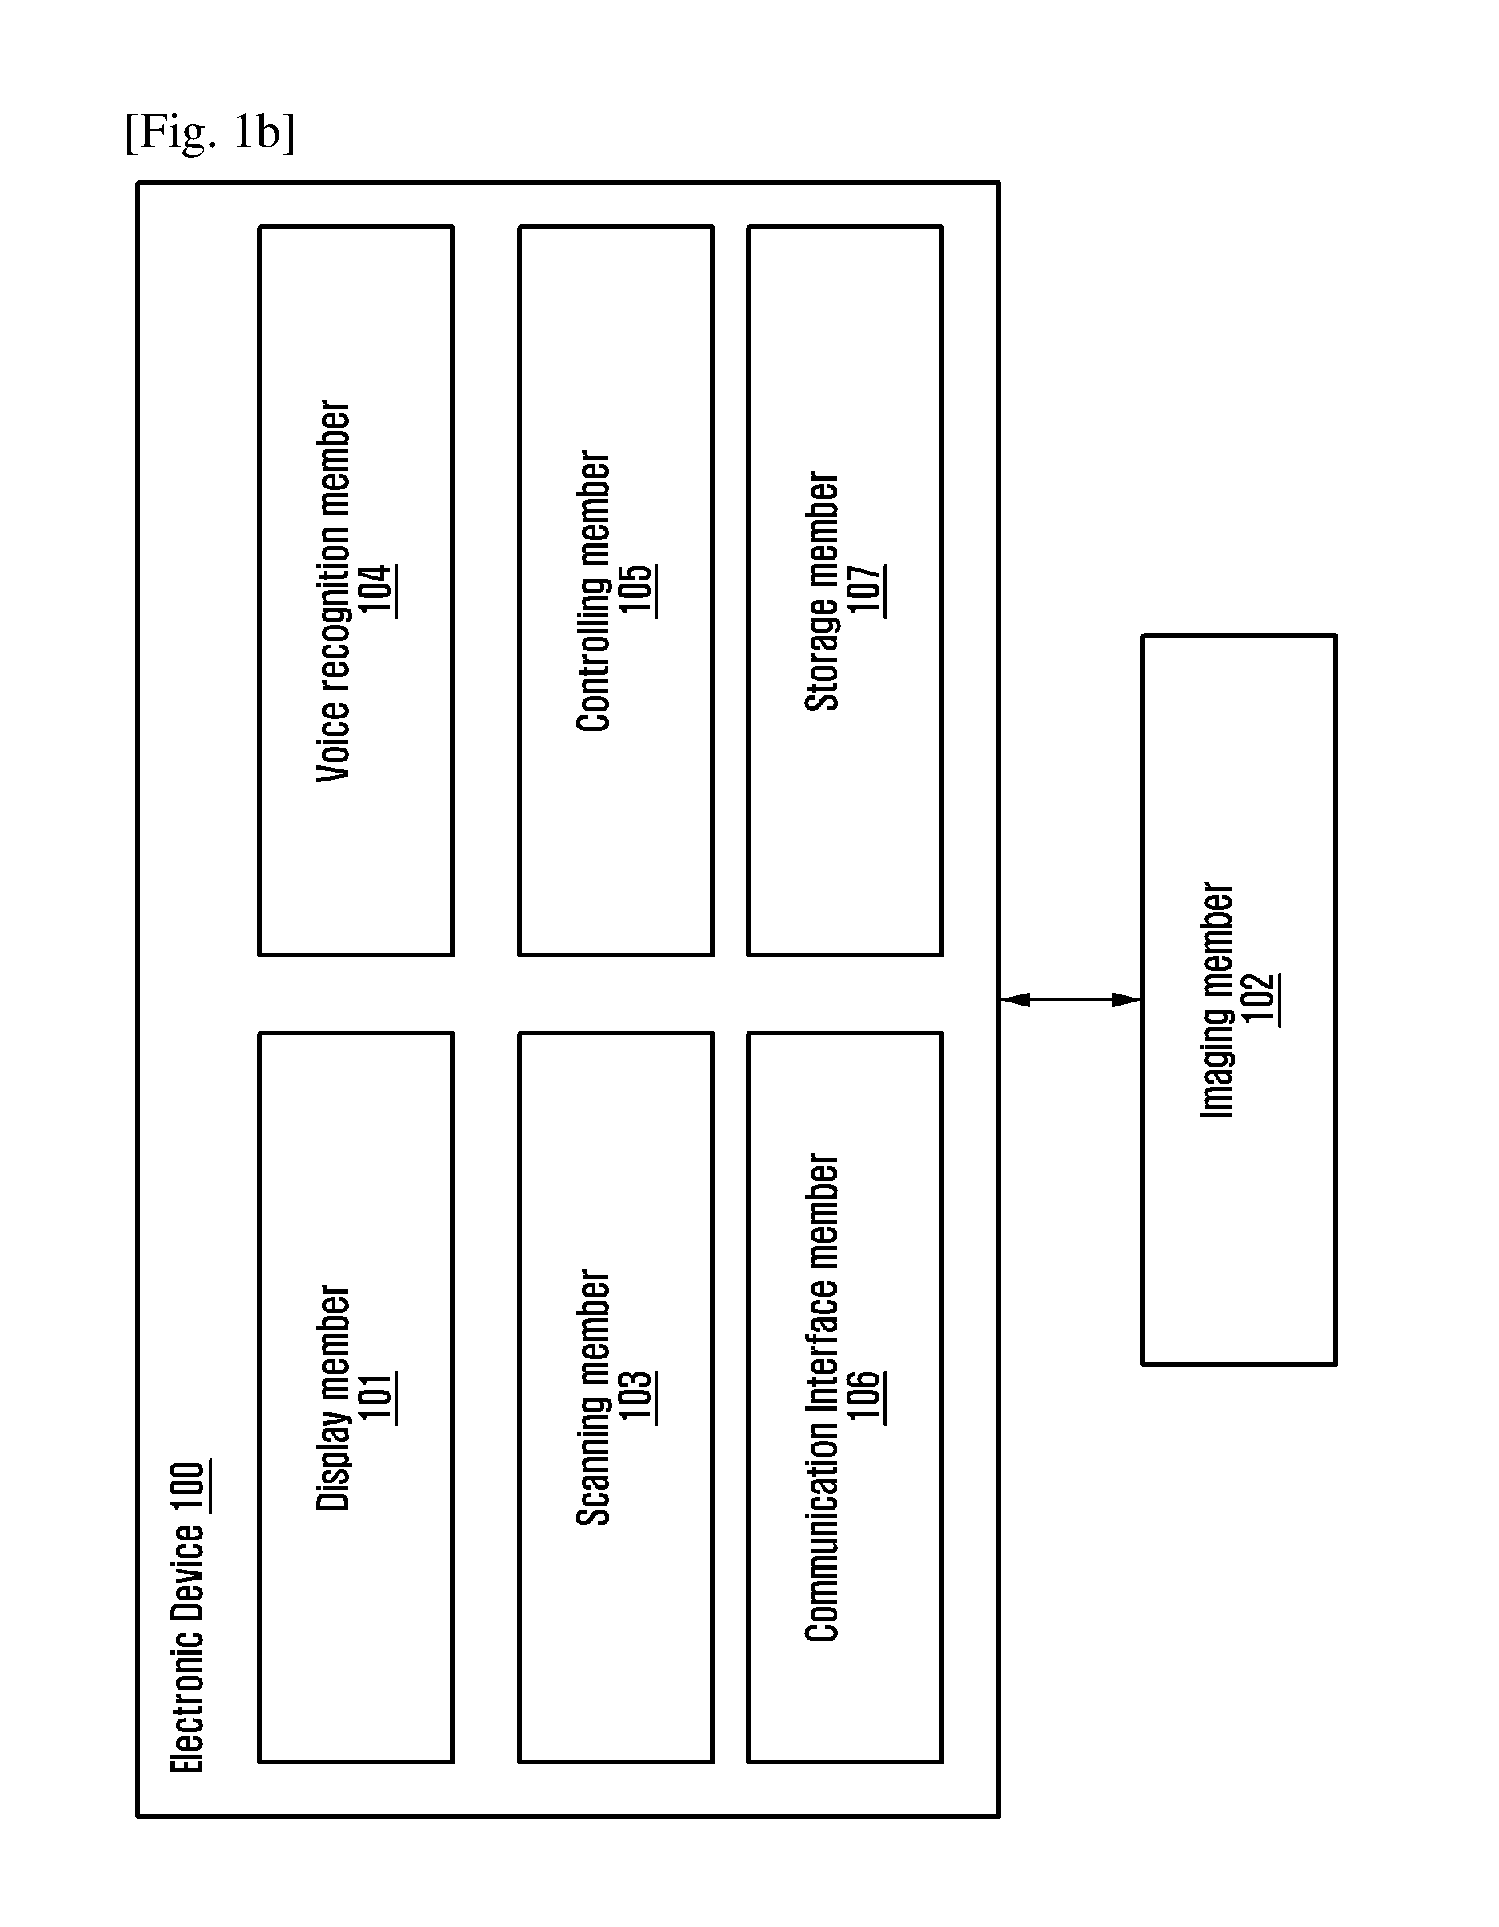 Method and system for capturing food consumption information of a user